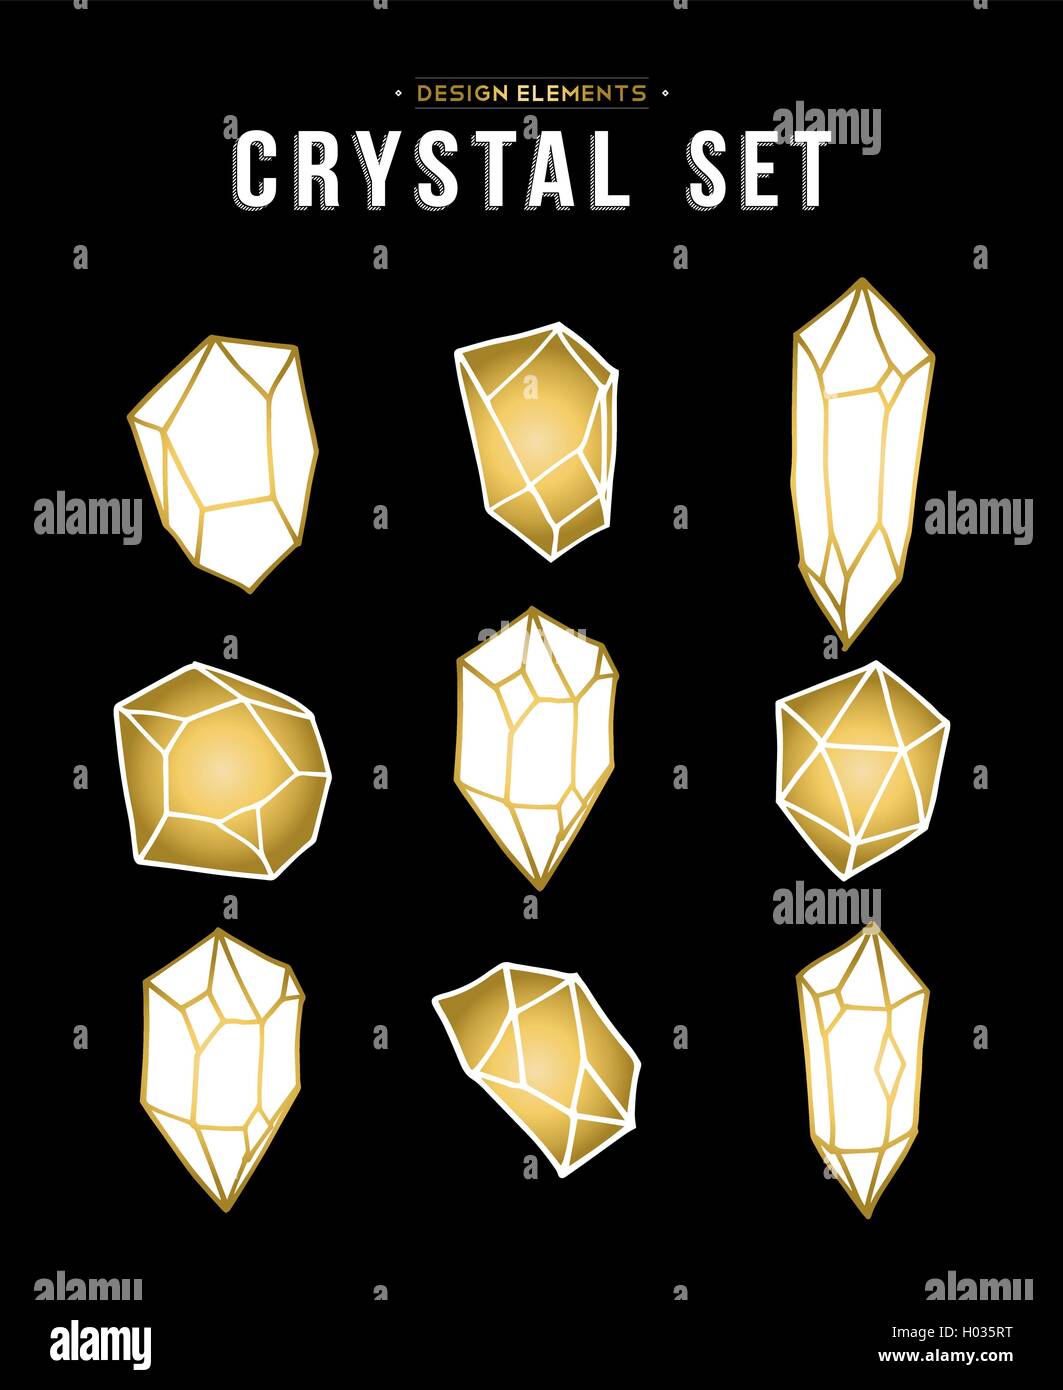 Set of gold color crystal mineral stone elements, simple hand drawn diamond rock icons collection. EPS10 vector. Stock Vector